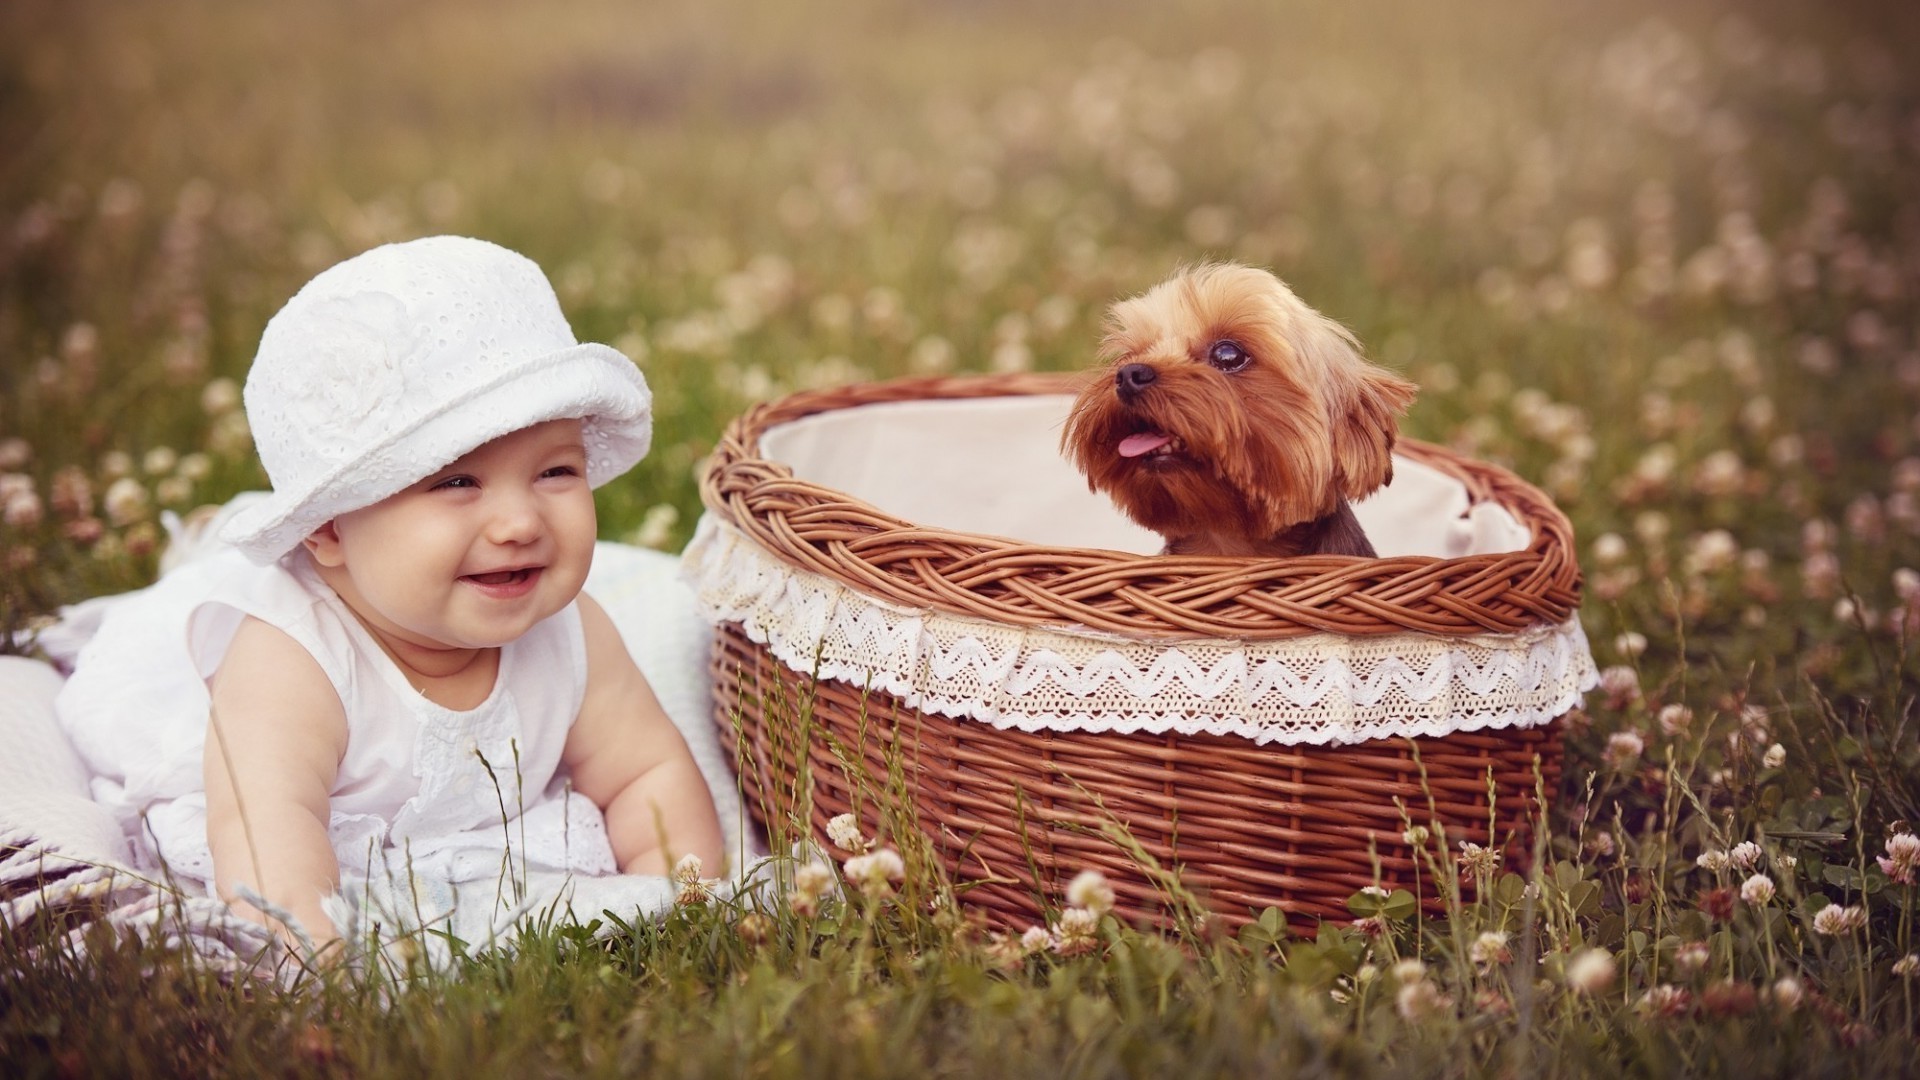 baby puppies dog grass baskets smiling Wallpaper